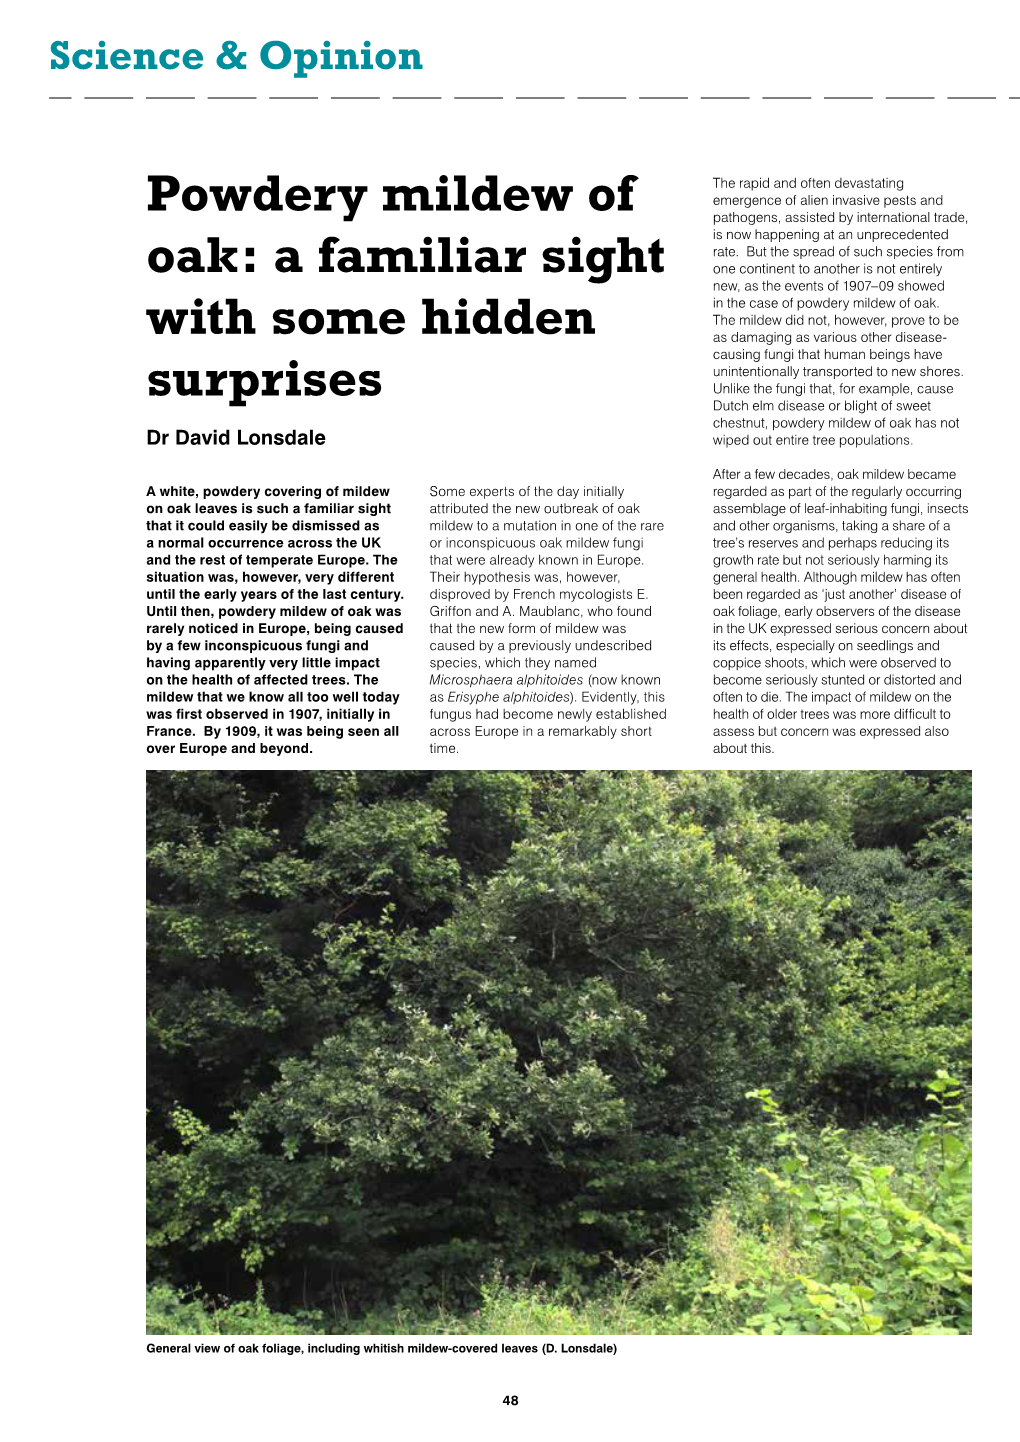 Powdery Mildew of Oak: a Familiar Sight with Some Hidden Surprises